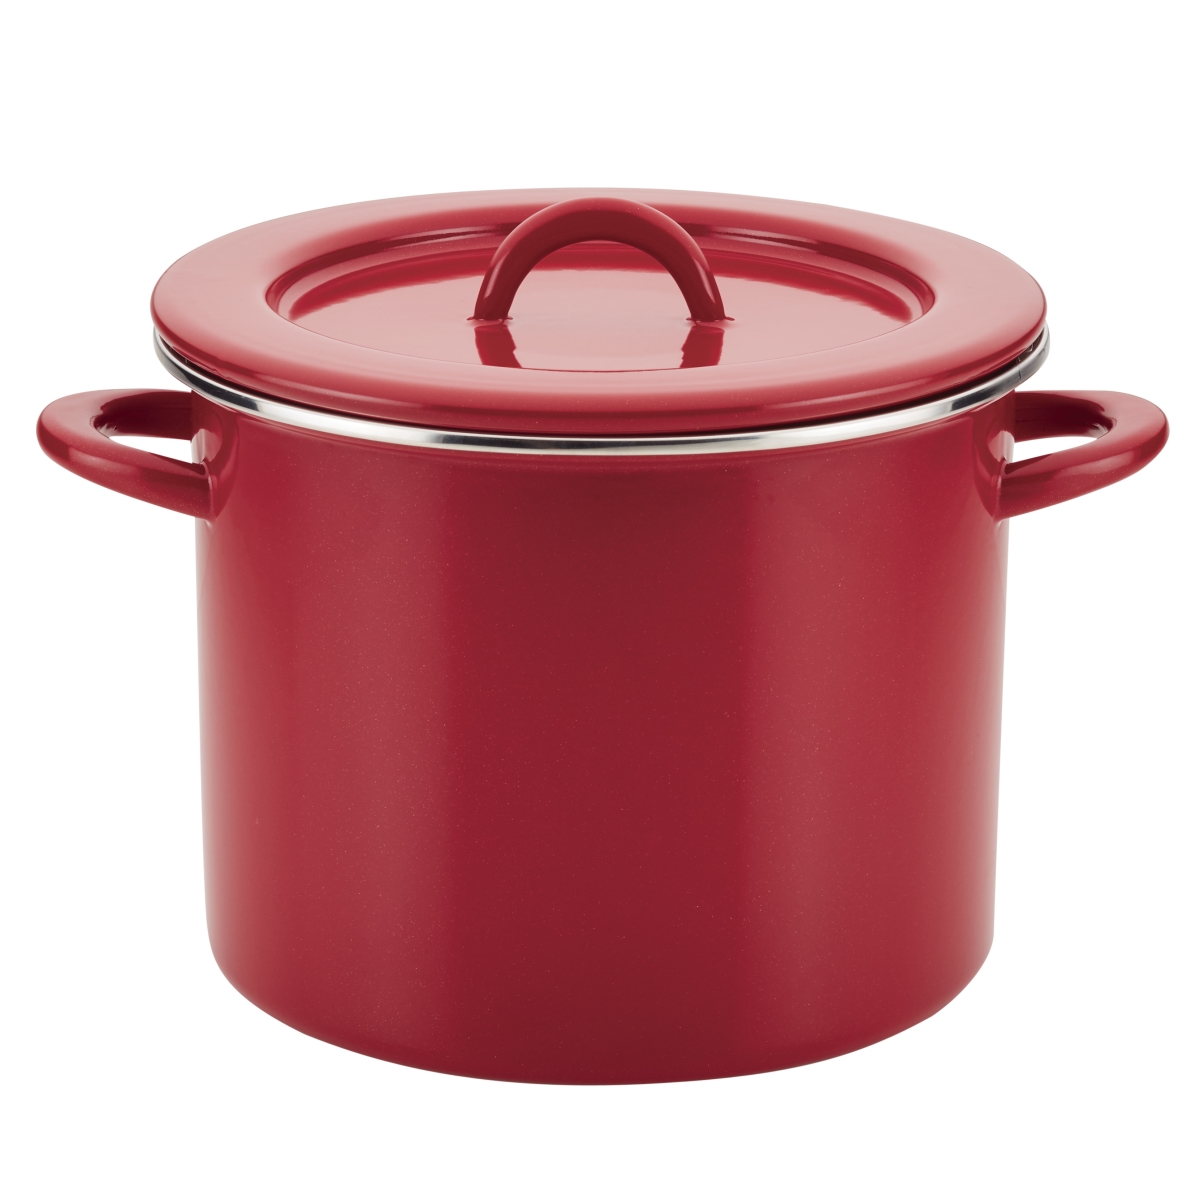 Picture of Rachael Ray 47626 12 qt. Create Delicious Enamel on Steel Stockpot - Red Shimmer